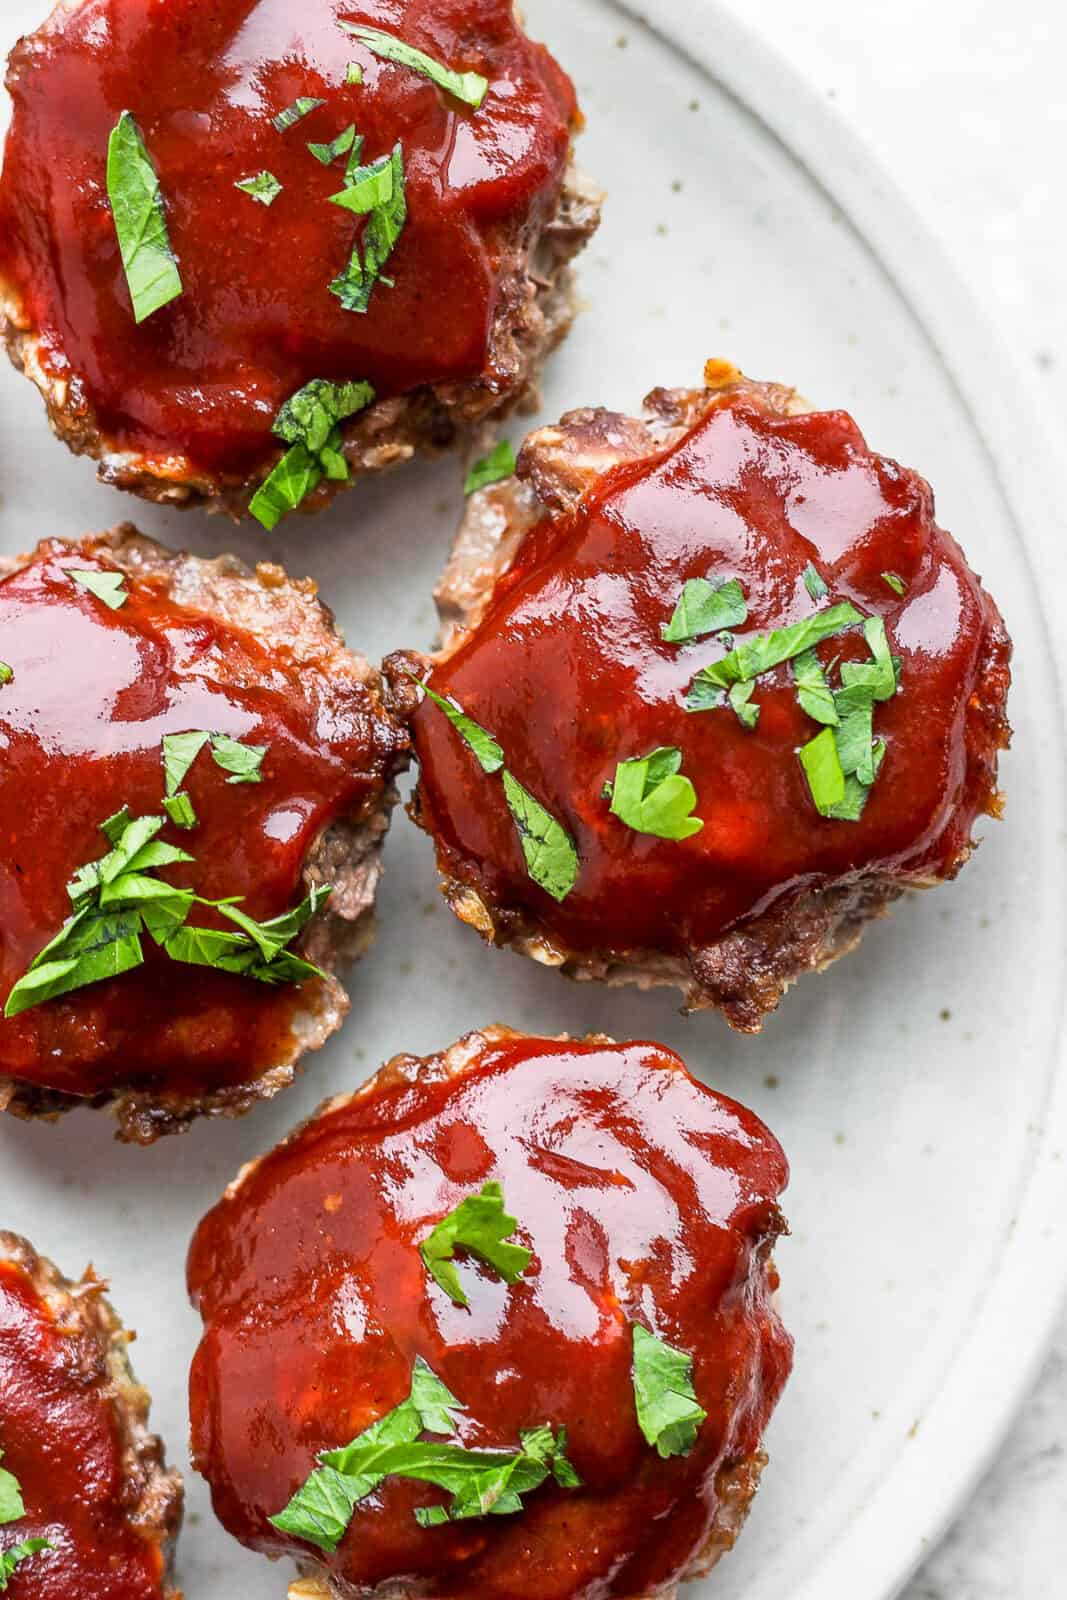 Mini meatloaf on a plate with glaze on top and garnished with fresh parsley.